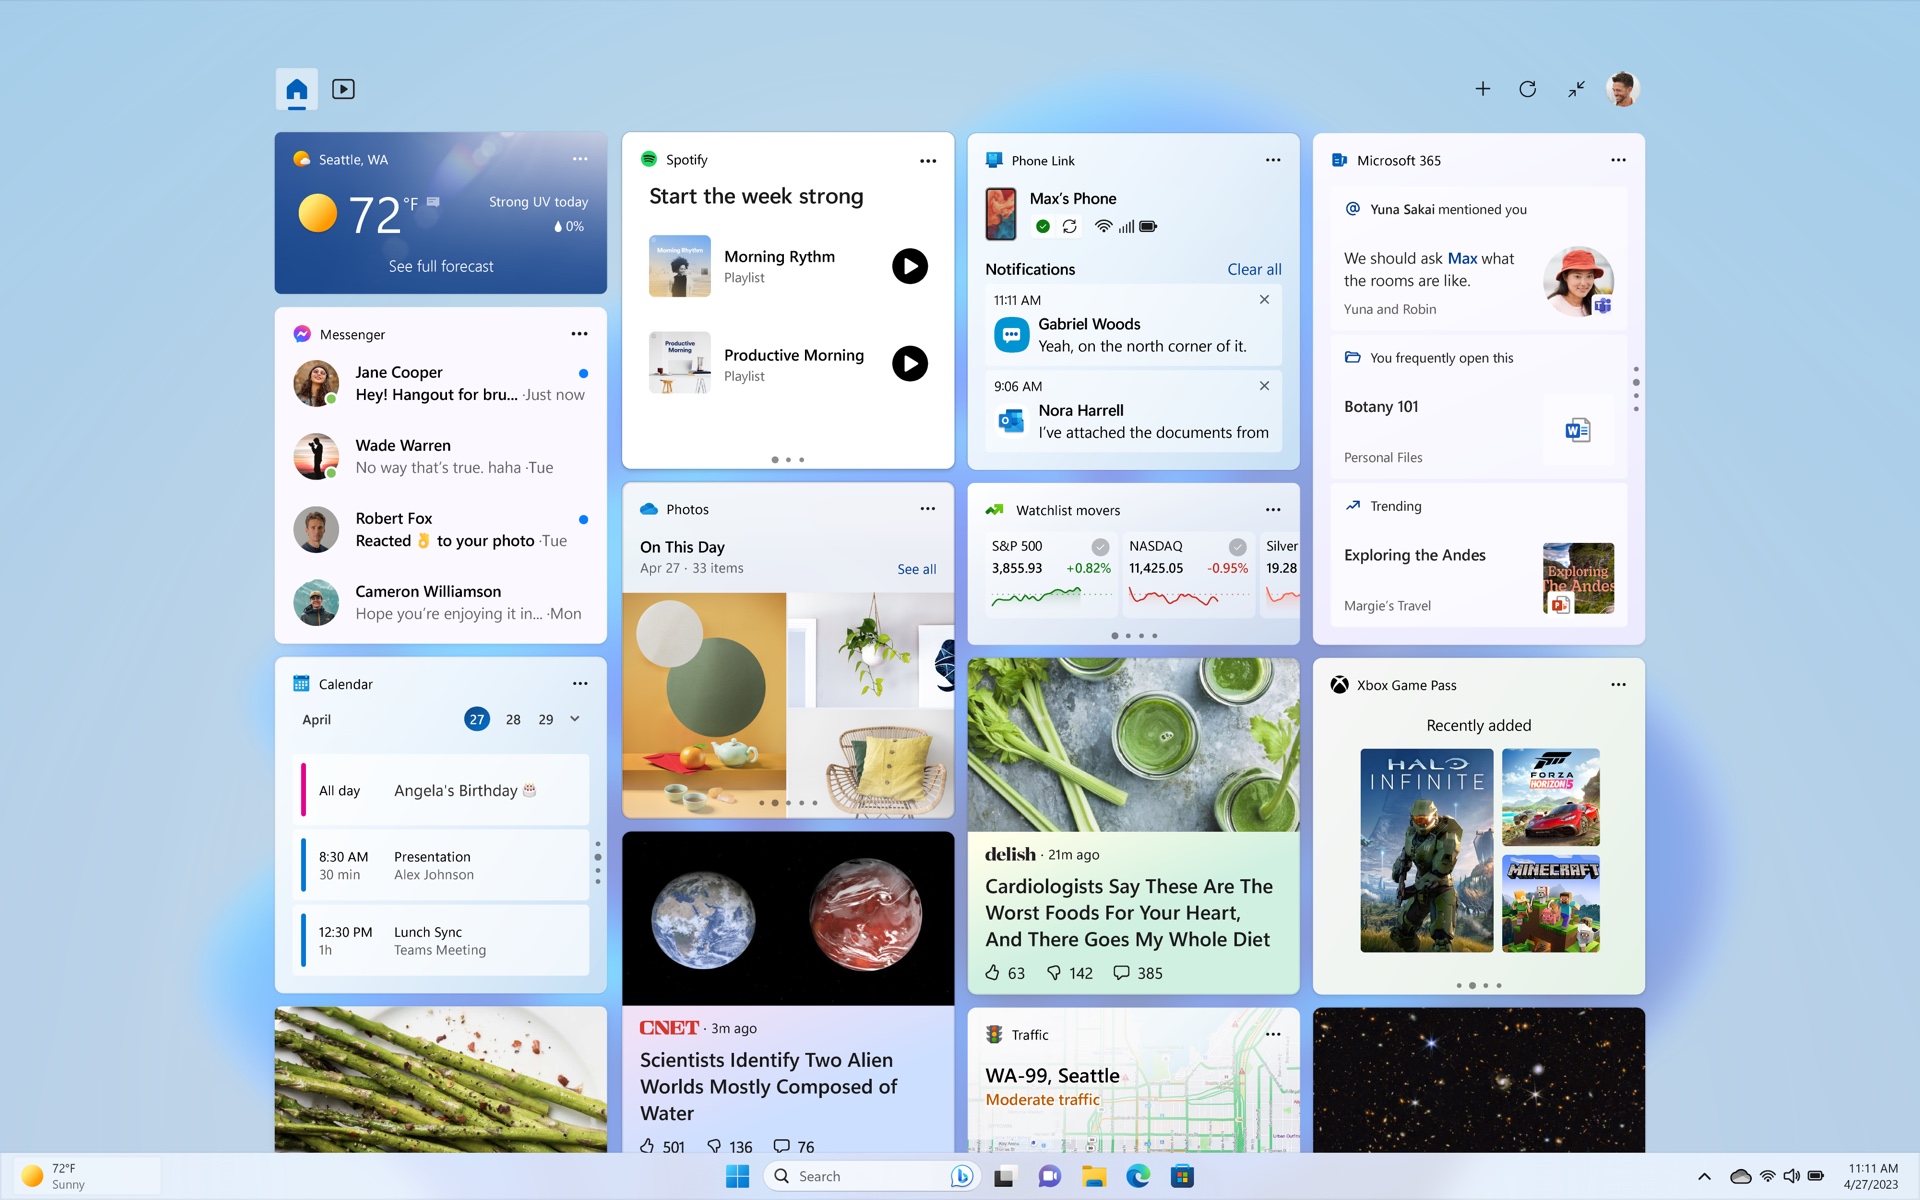 Facebook Messenger, Spotify, Xbox Game Pass, and the Phone Link widgets add little functionality to the Microsoft Start-dominated Widgets screen.